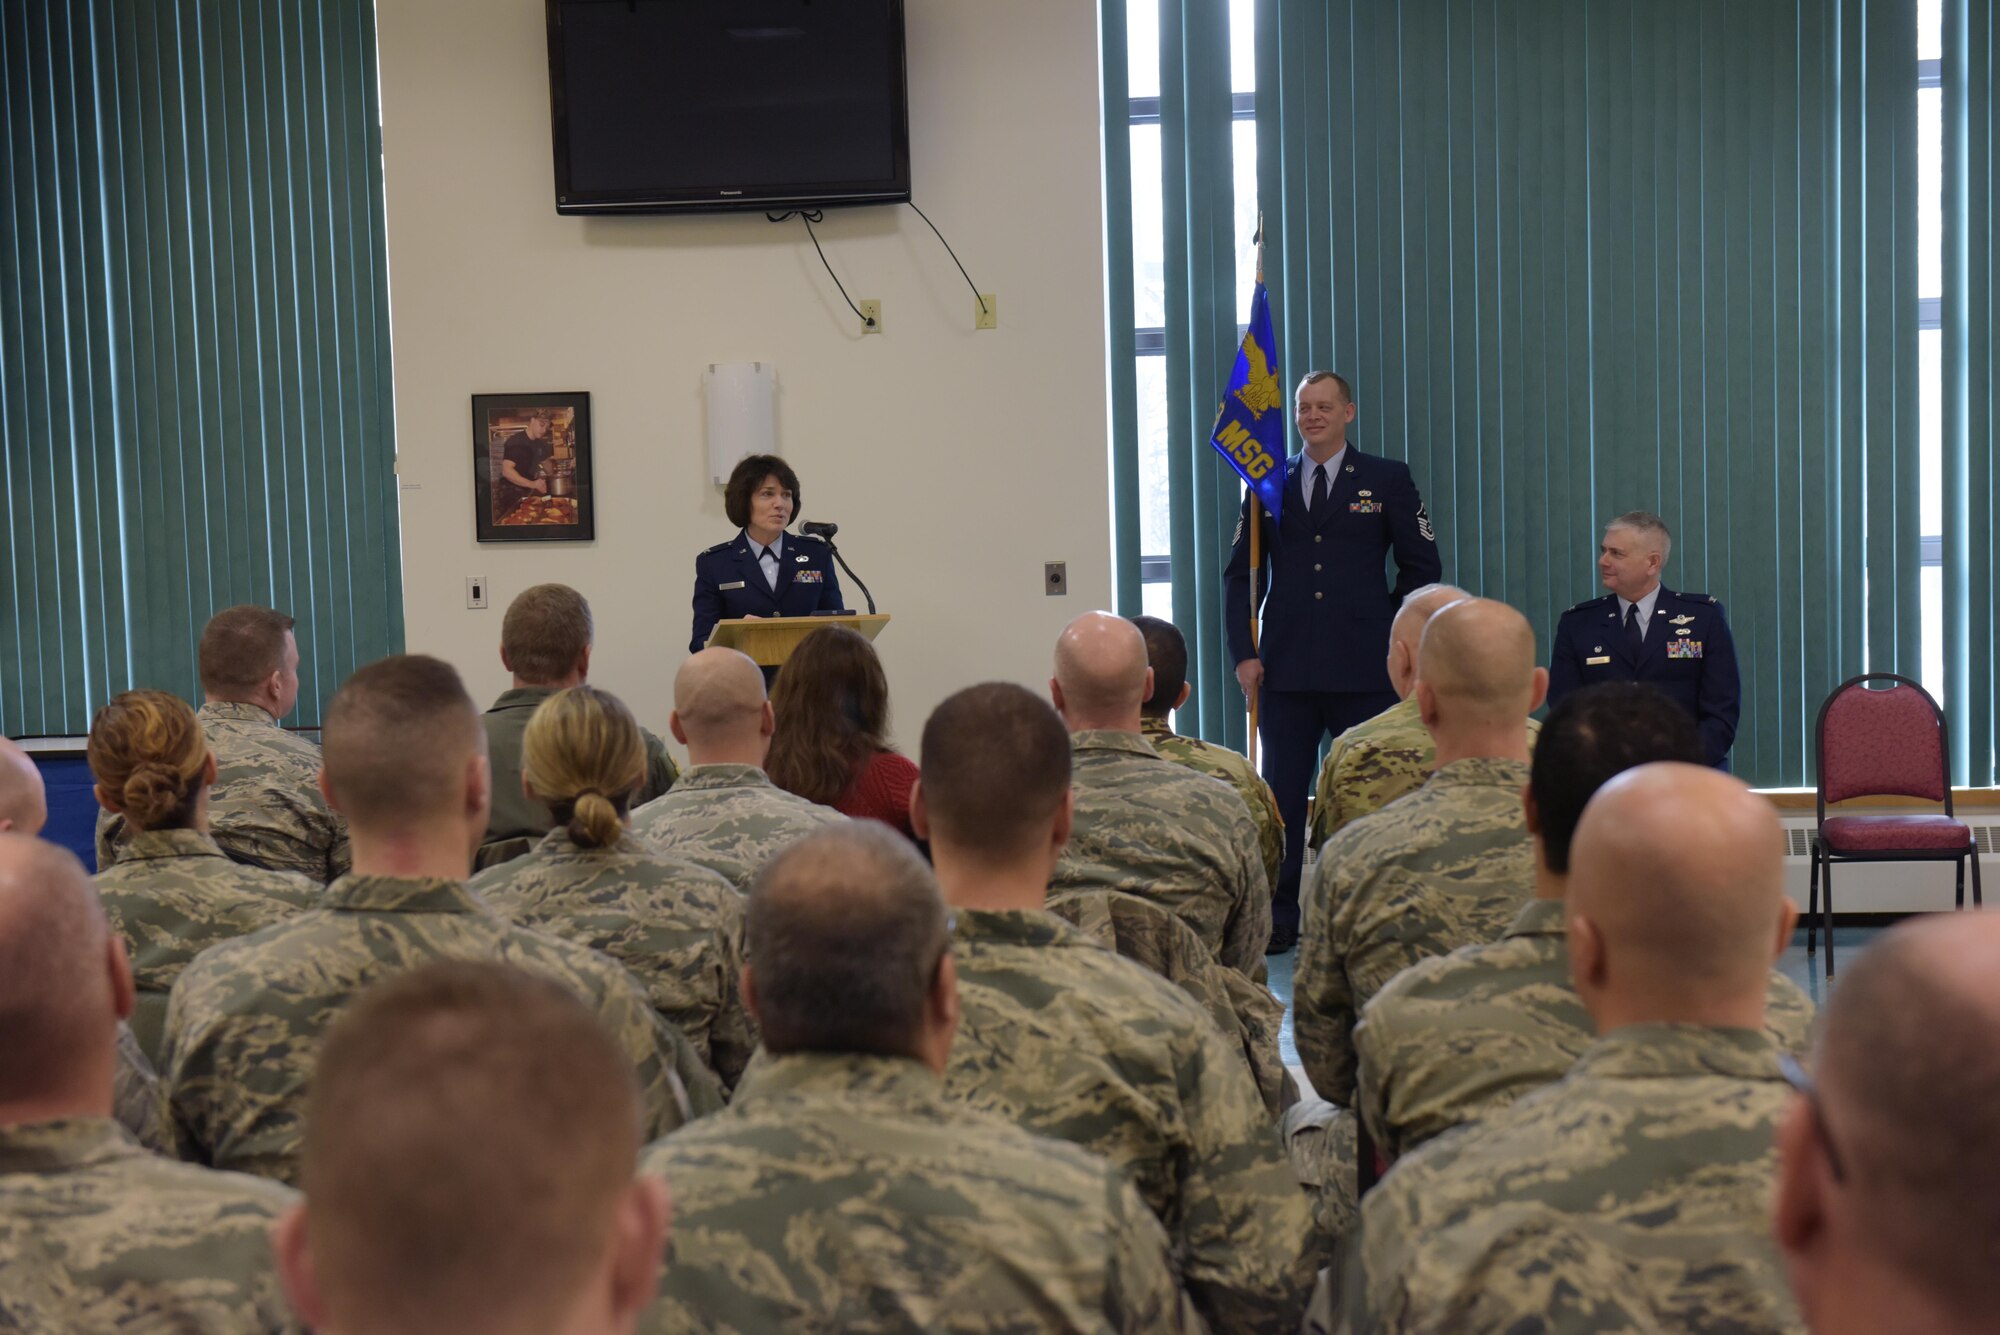 Col. Maureen Murphy, incoming 109th Mission Support Group commander, adresses the audience as Col. Shawn Clouthier, 109th Airlift Wing commander, looks on during the MSG change of command ceremony at Stratton Air National Guard Base, New York, on Feb. 4, 2017.  (U.S. Air National Guard photo by Staff Sgt. Ben German/Released)